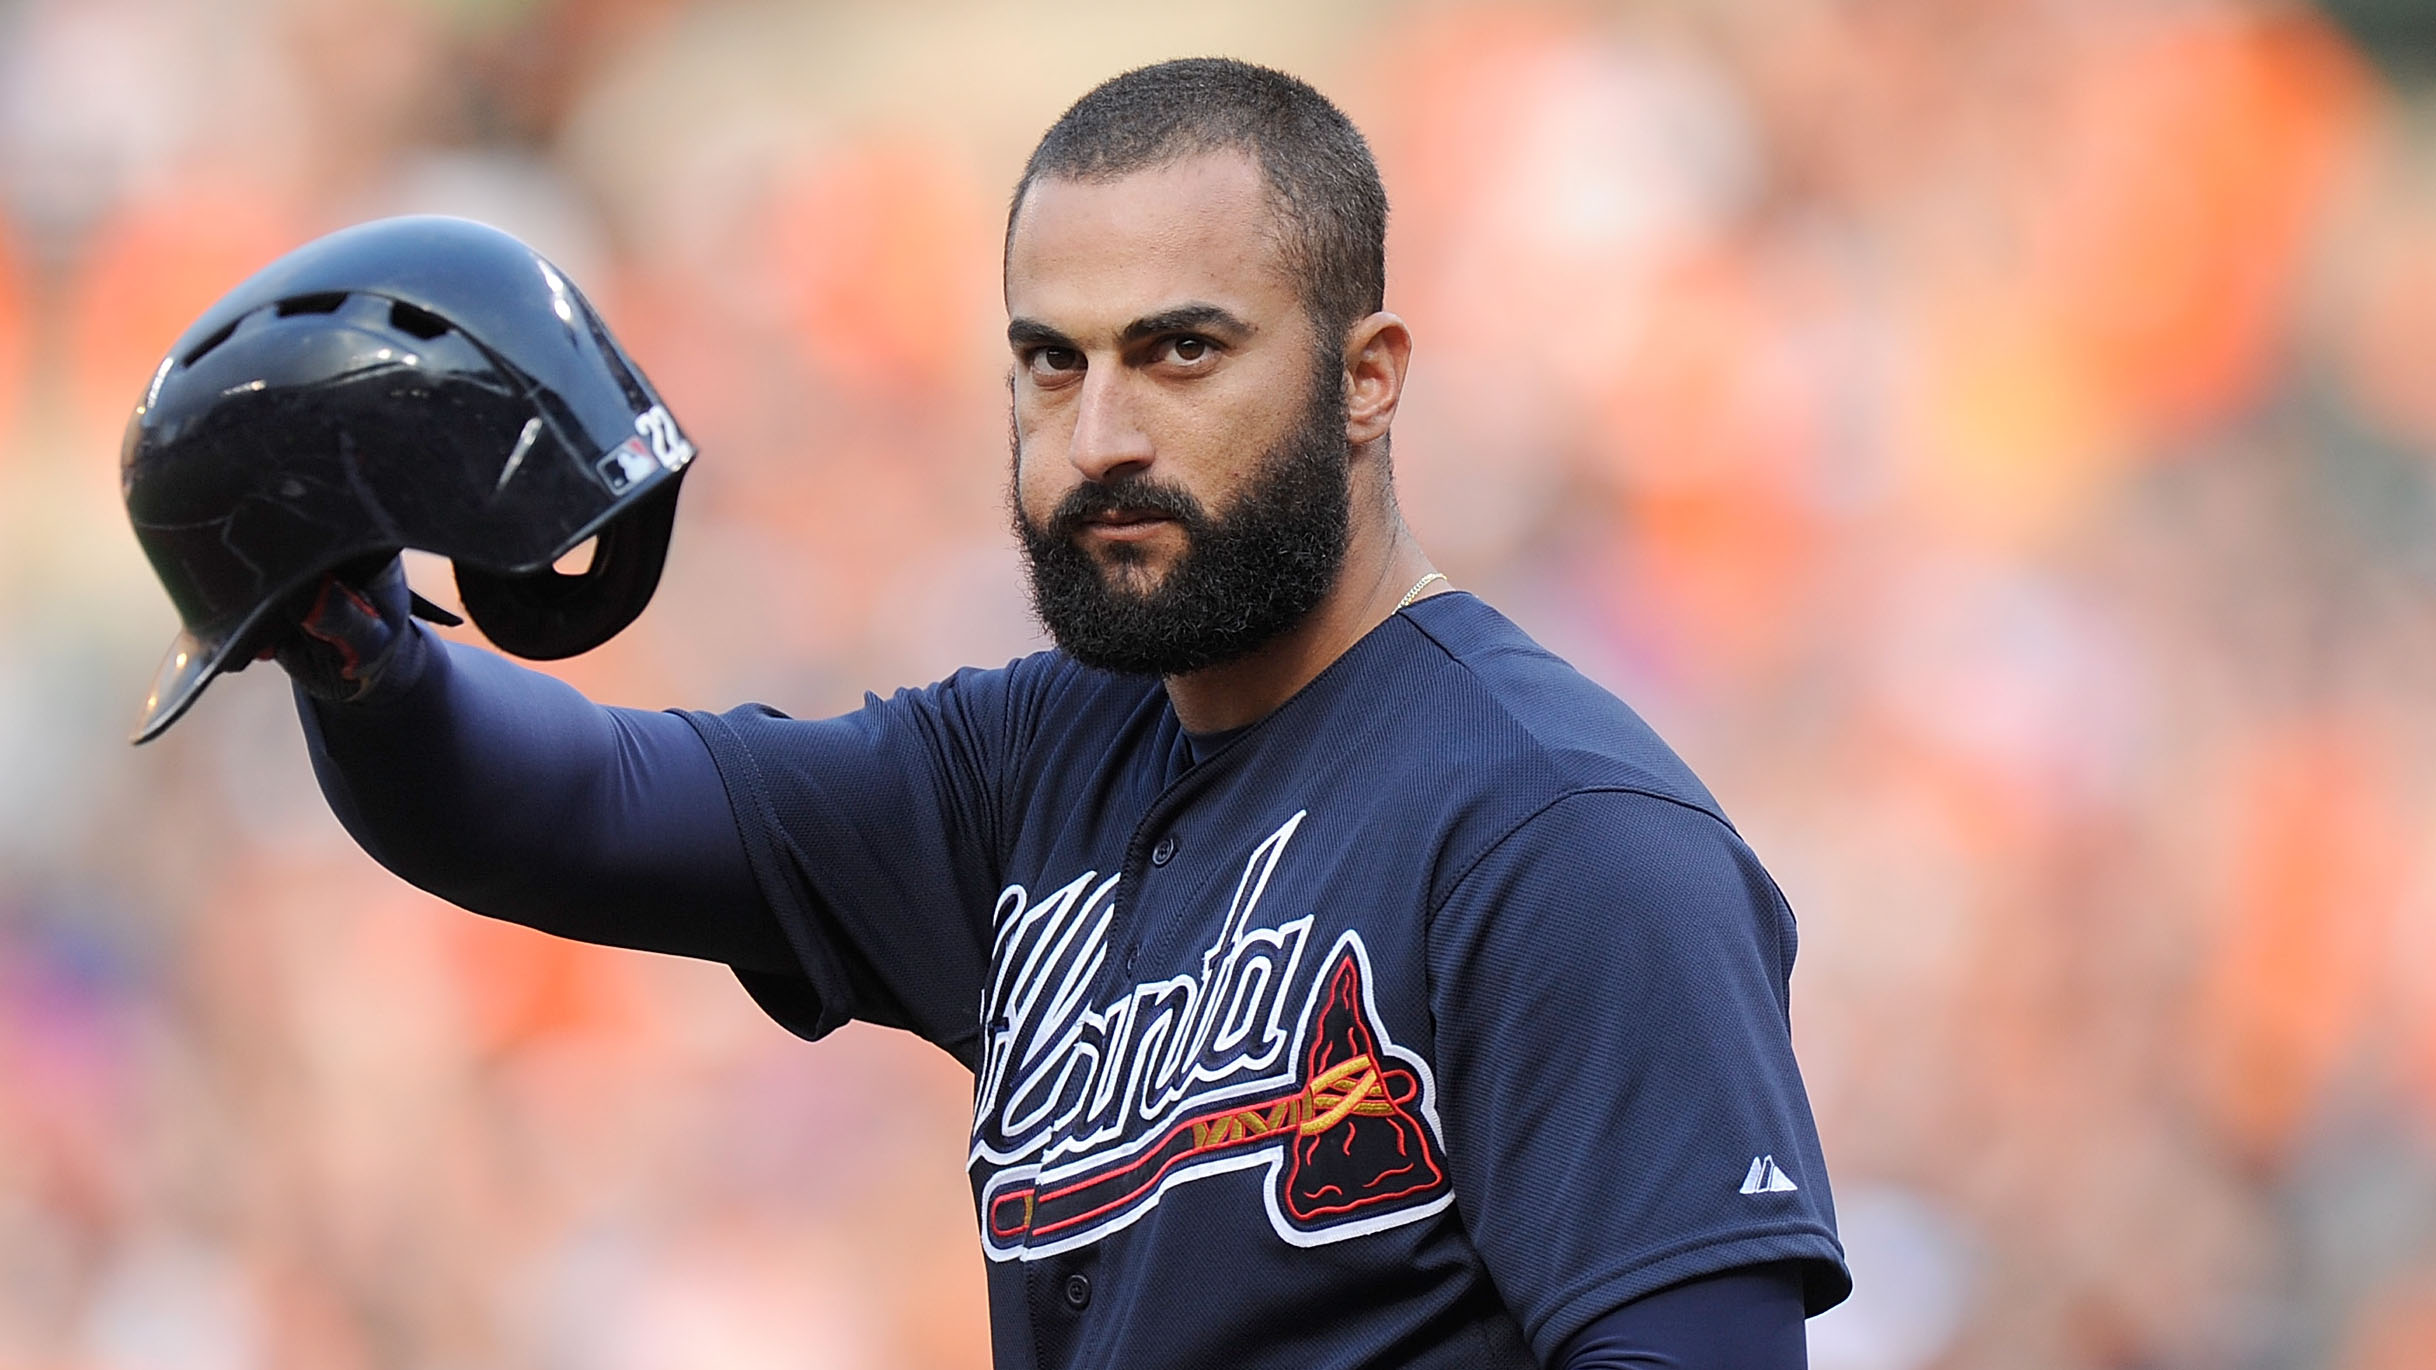 Nick Markakis agrees to four-year deal with Braves – Sun Sentinel